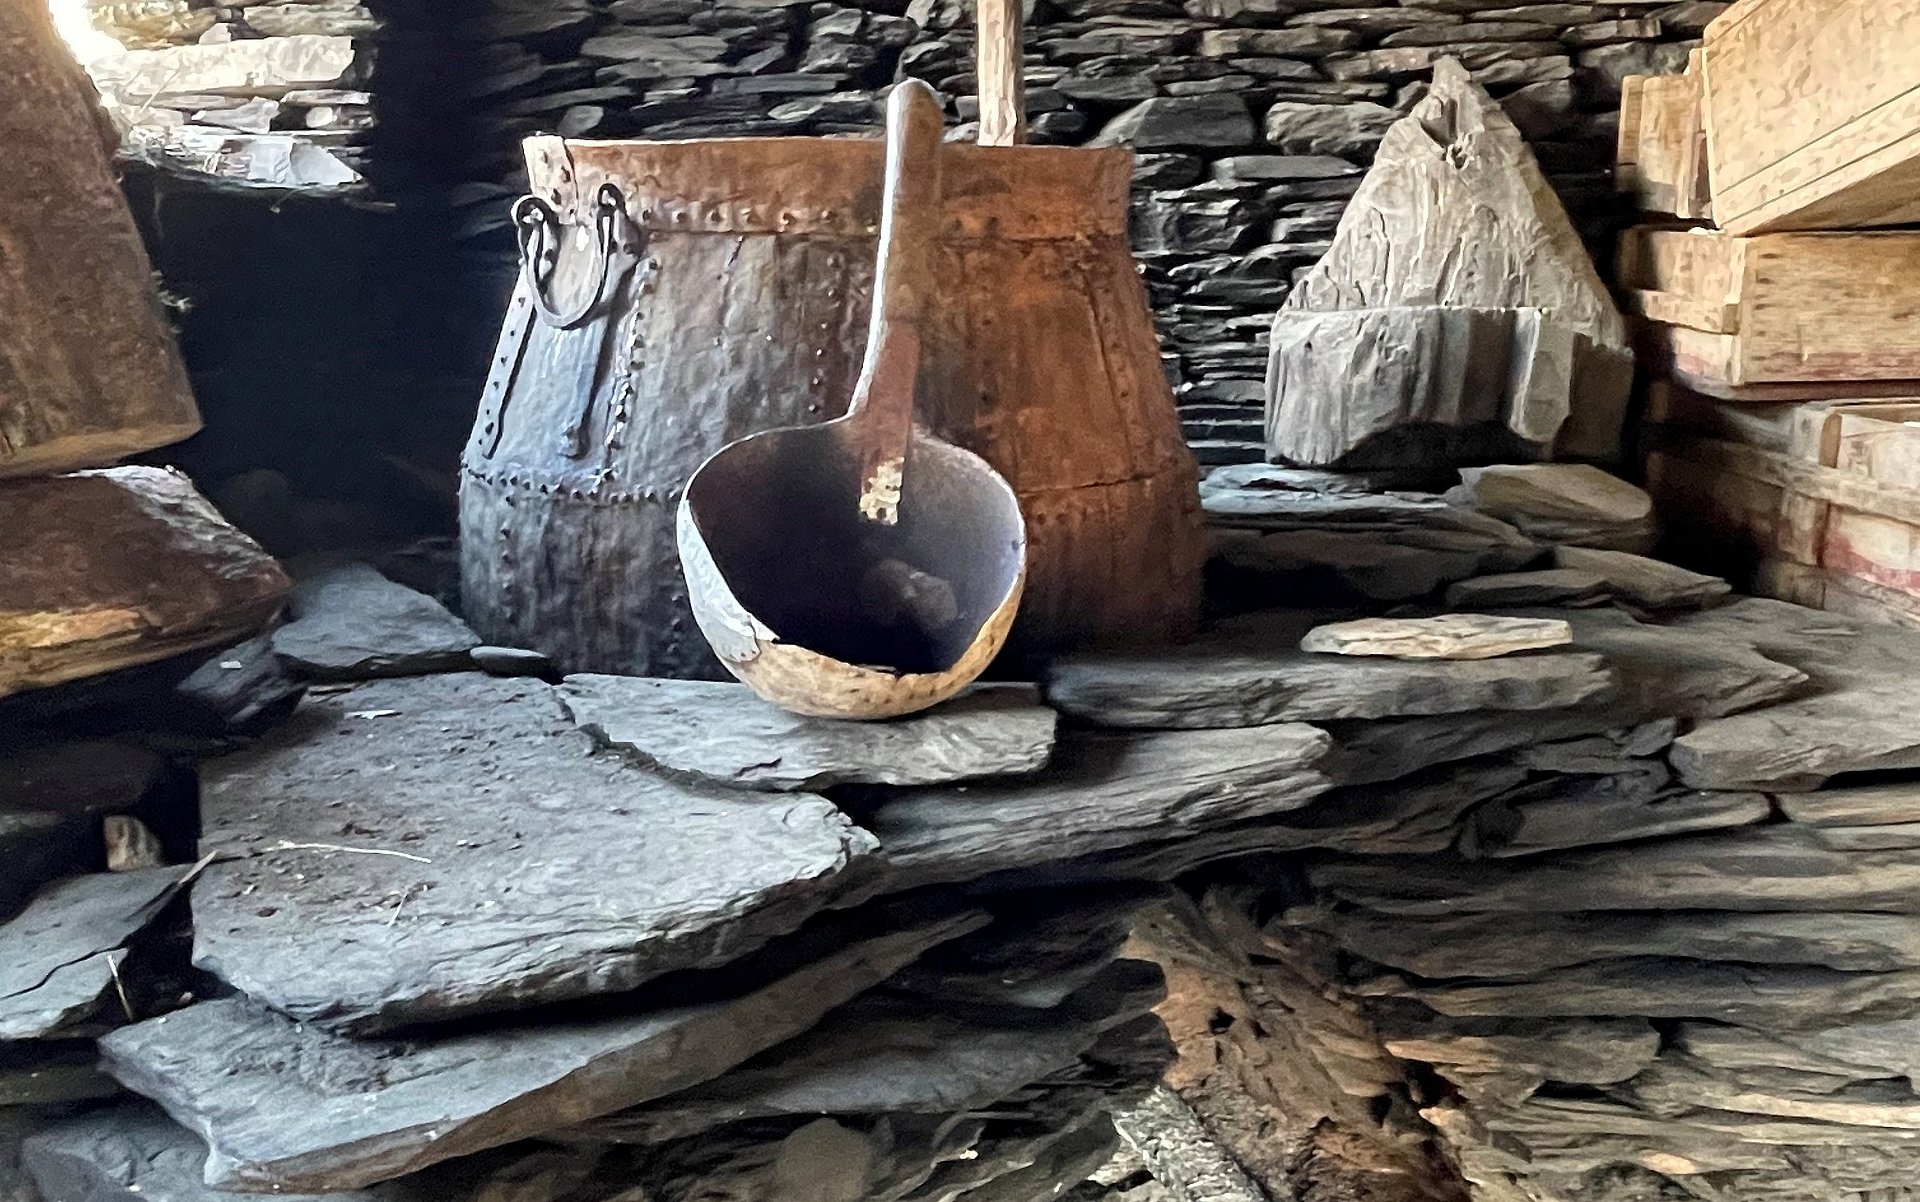 An old copper kettle and wooden brewing utensils.